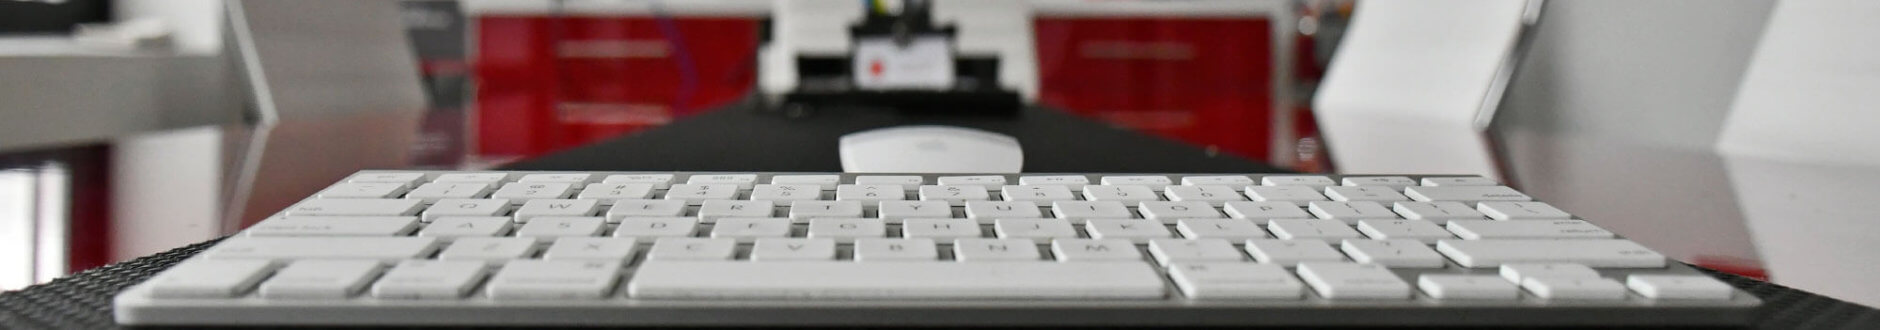 Keyboard in the Trademark Productions Headquarters